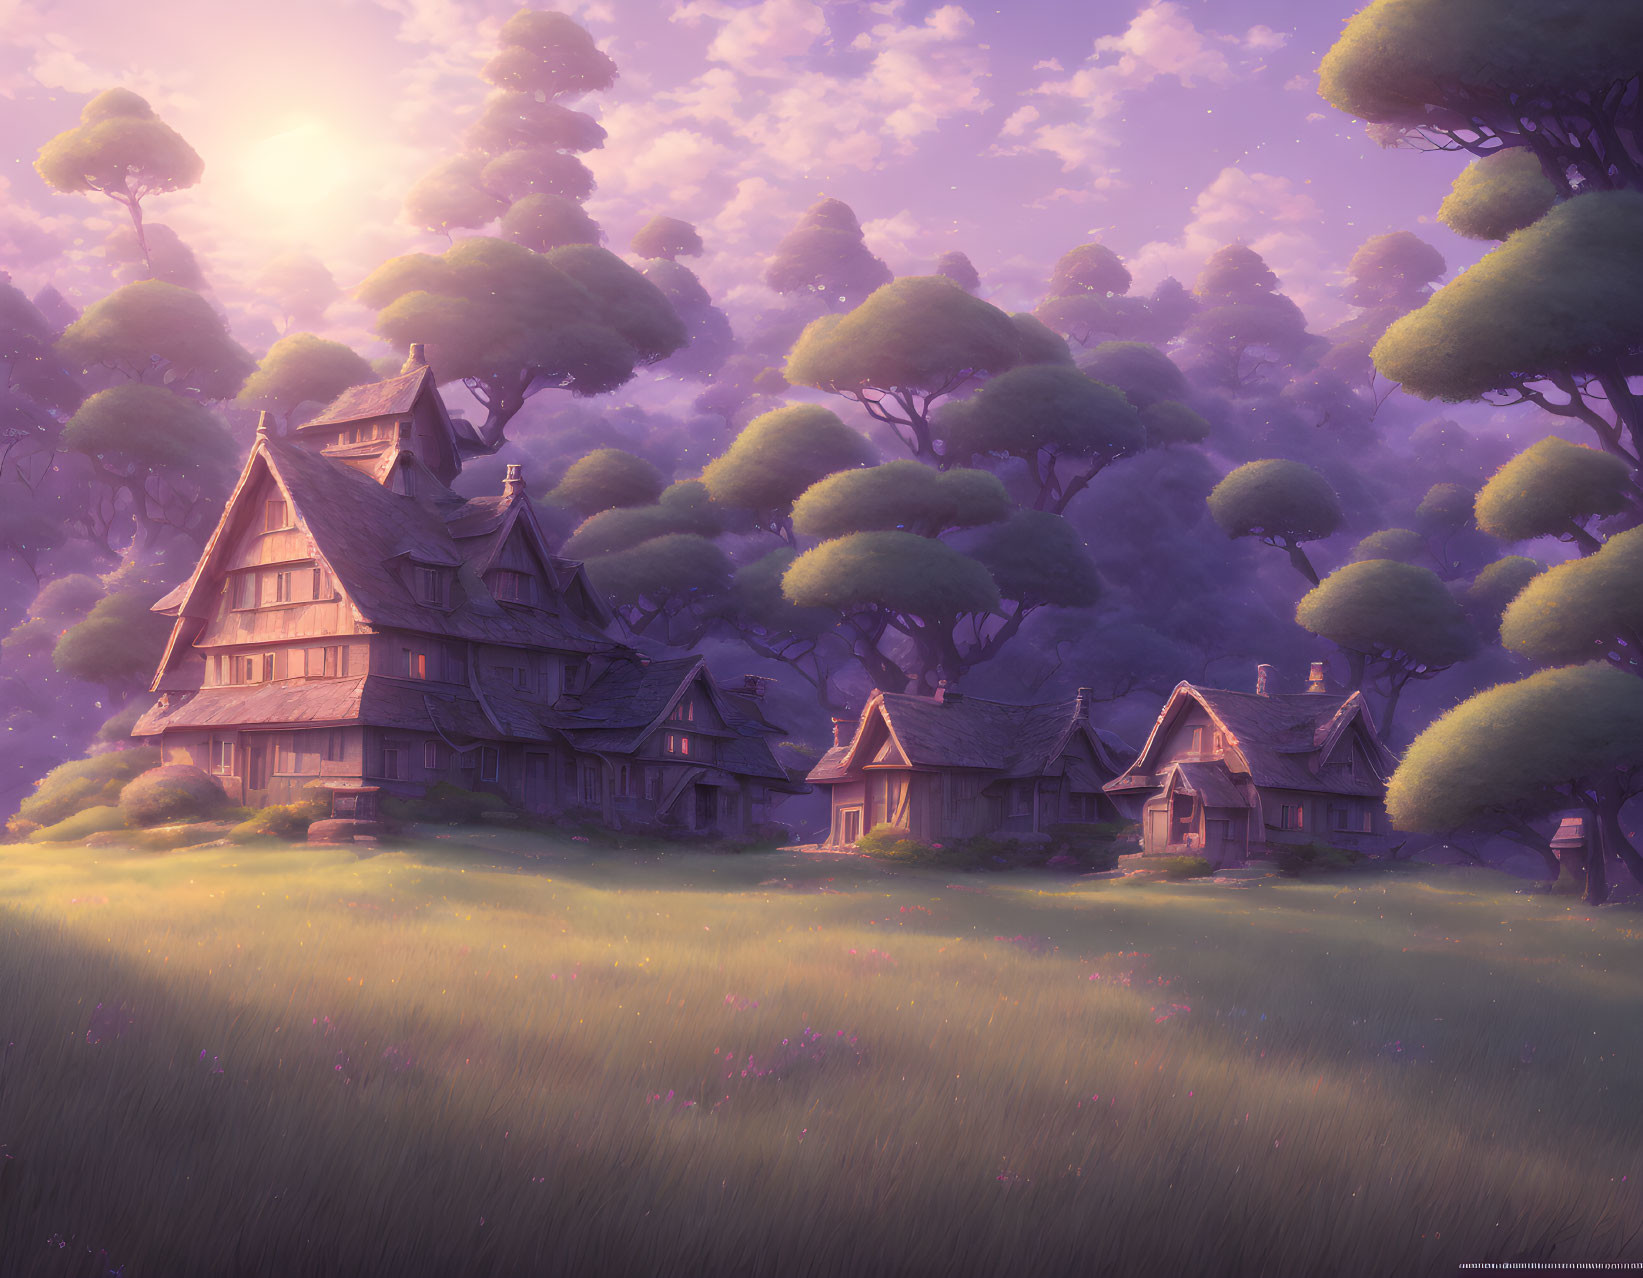 Fantasy Landscape: Sunset with Medieval Cottages & Glowing Trees